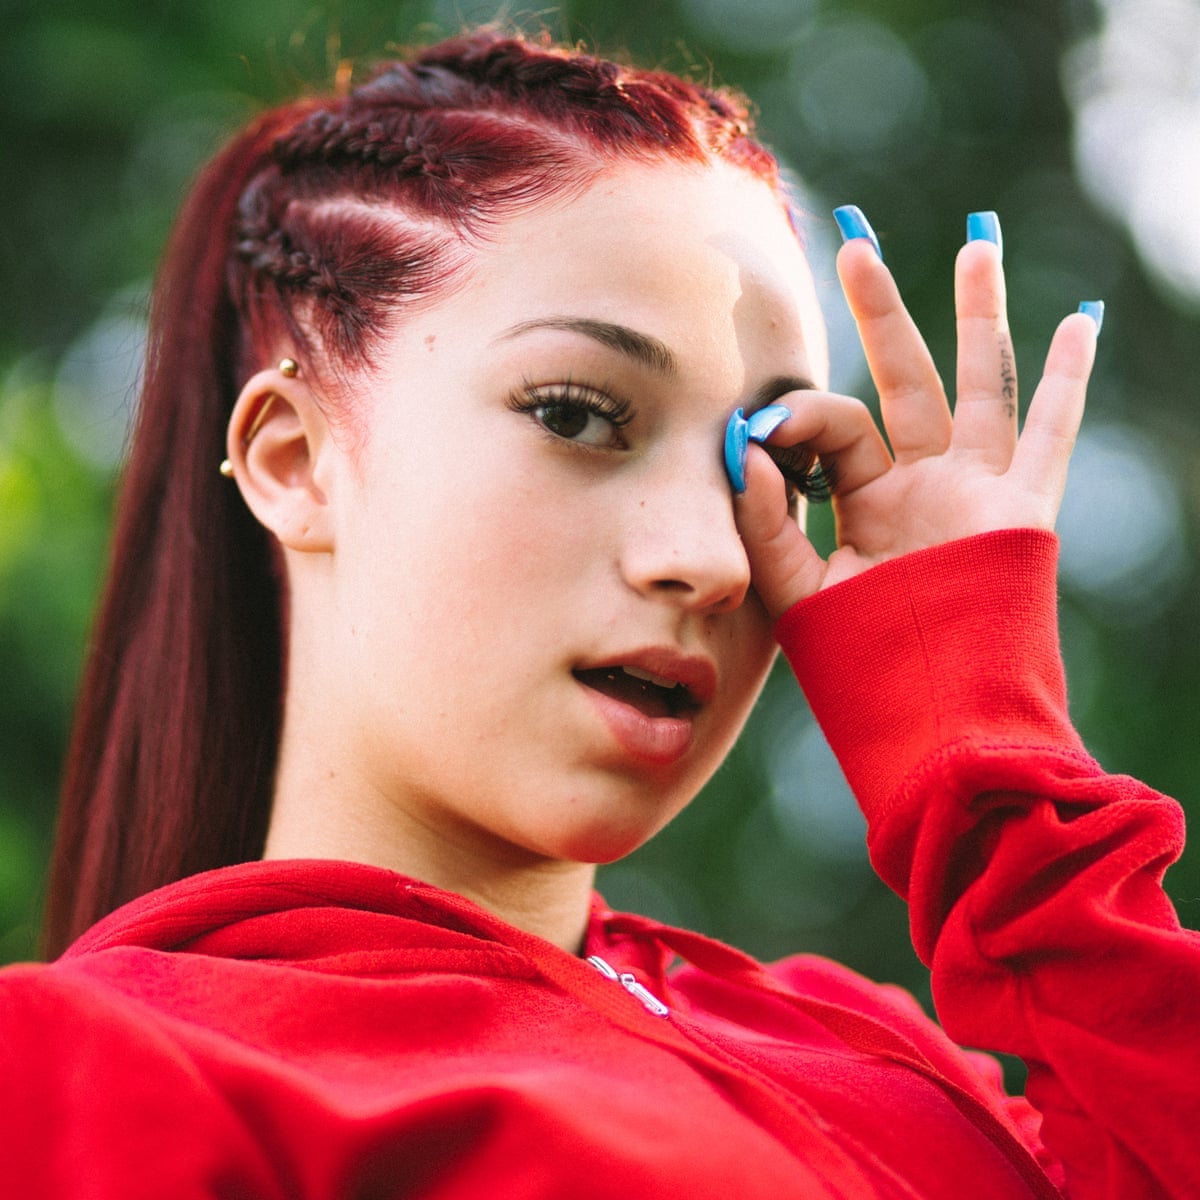 Nudes onlyfans bhad does bhabie have on Bhad Bhabie